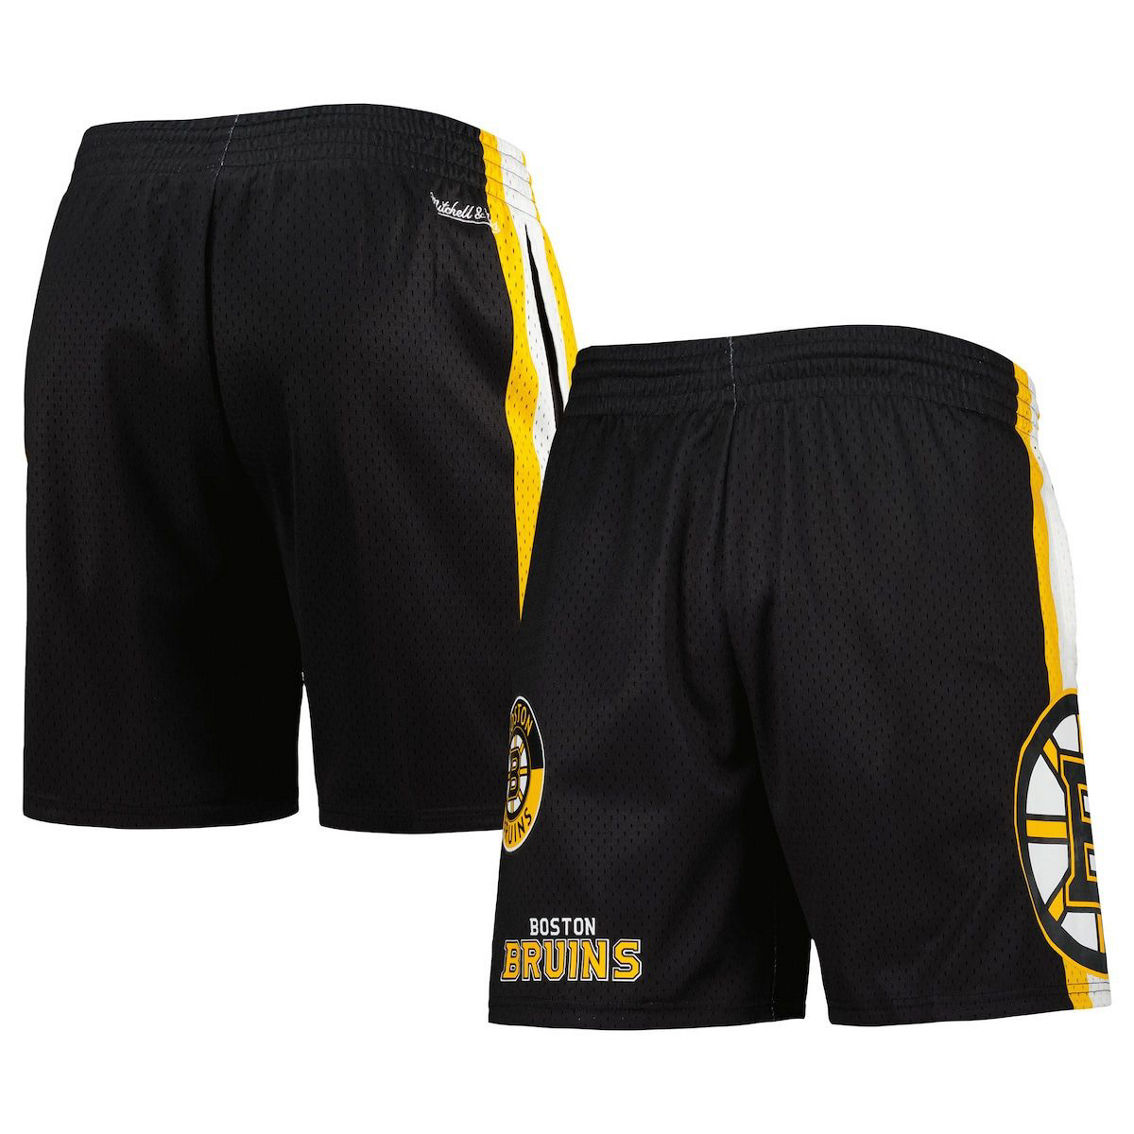 Mitchell & Ness Men's Black Boston Bruins City Collection Mesh Shorts - Image 2 of 4